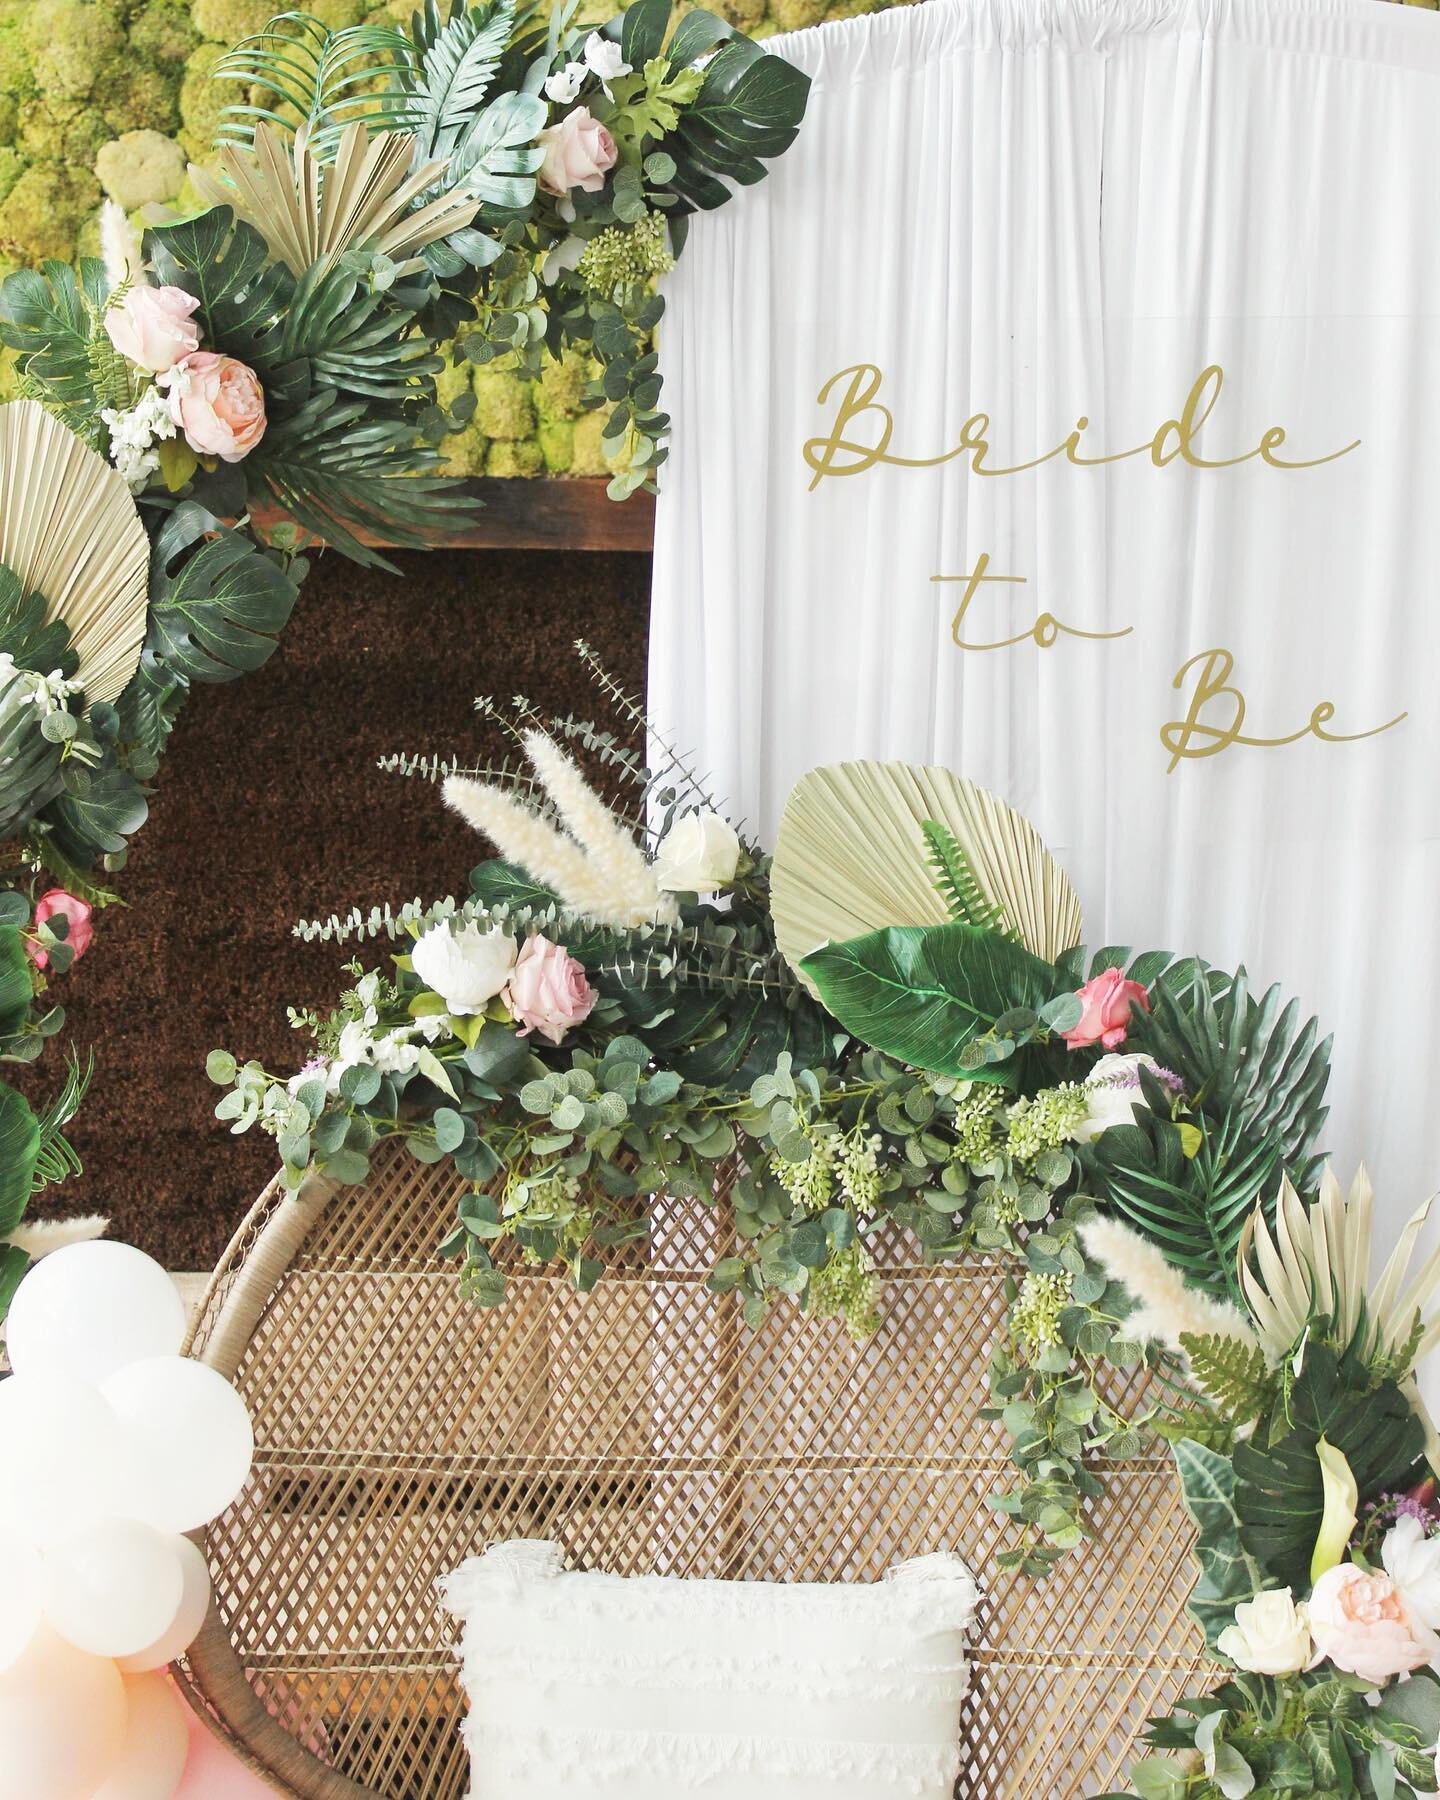 Tropical Vibes ✨

courtesy of @jaqiesevents 

Featuring my signature acrylic sign. Custom-made to say &ldquo;Bride to Be&rdquo; 🤗

&bull;
&bull;
&bull;
&bull;
&bull;
#bridalshower #bridalshowerdecor #bridalshowerbackdrop #bridalshowerideas #peacockc